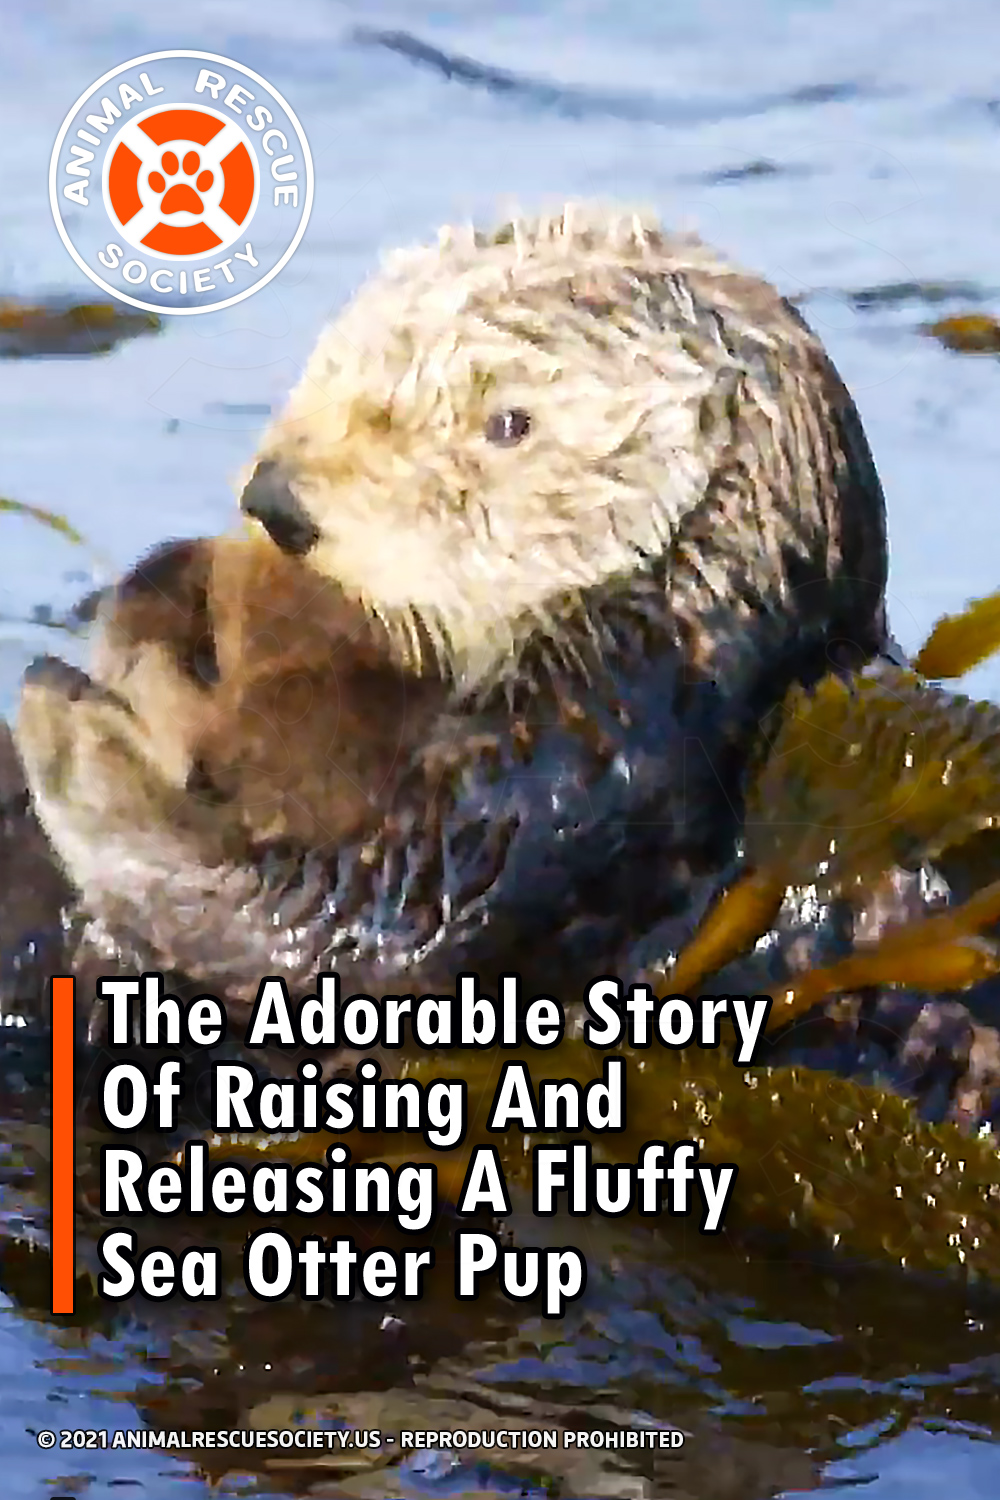 The Adorable Story Of Raising And Releasing A Fluffy Sea Otter Pup